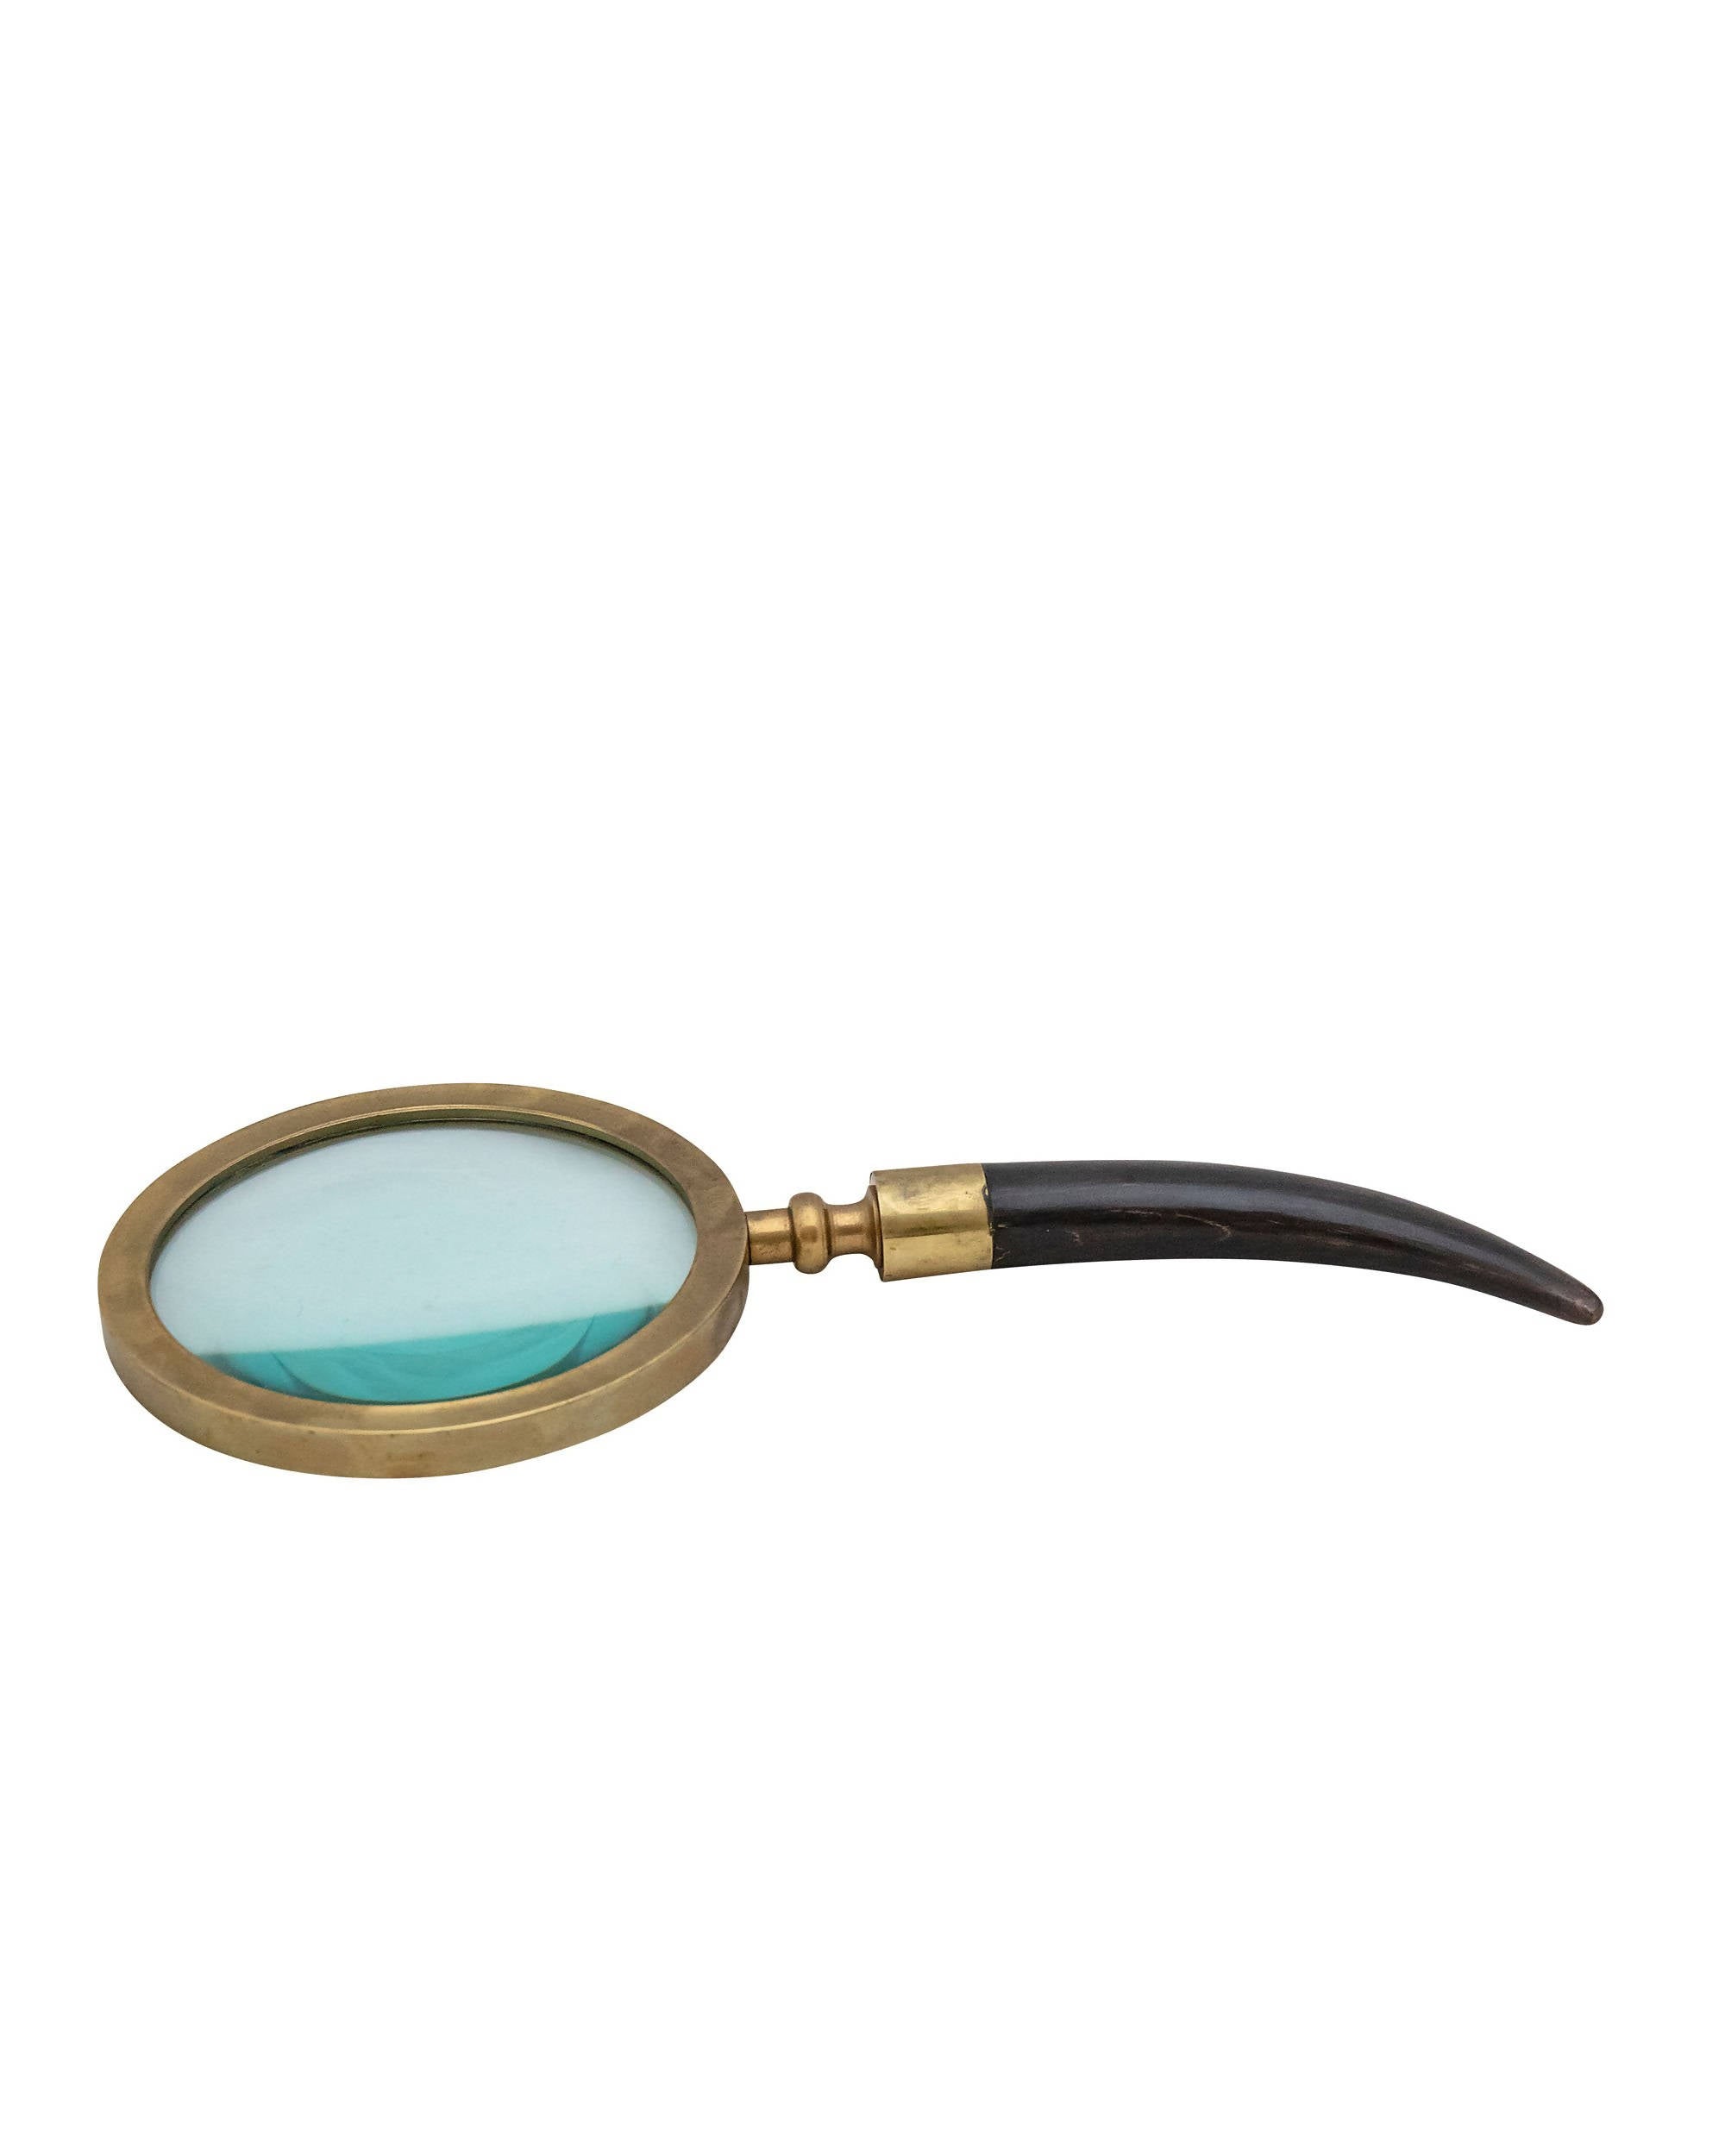 Desk magnifying glass with small handle in carved horn and brass